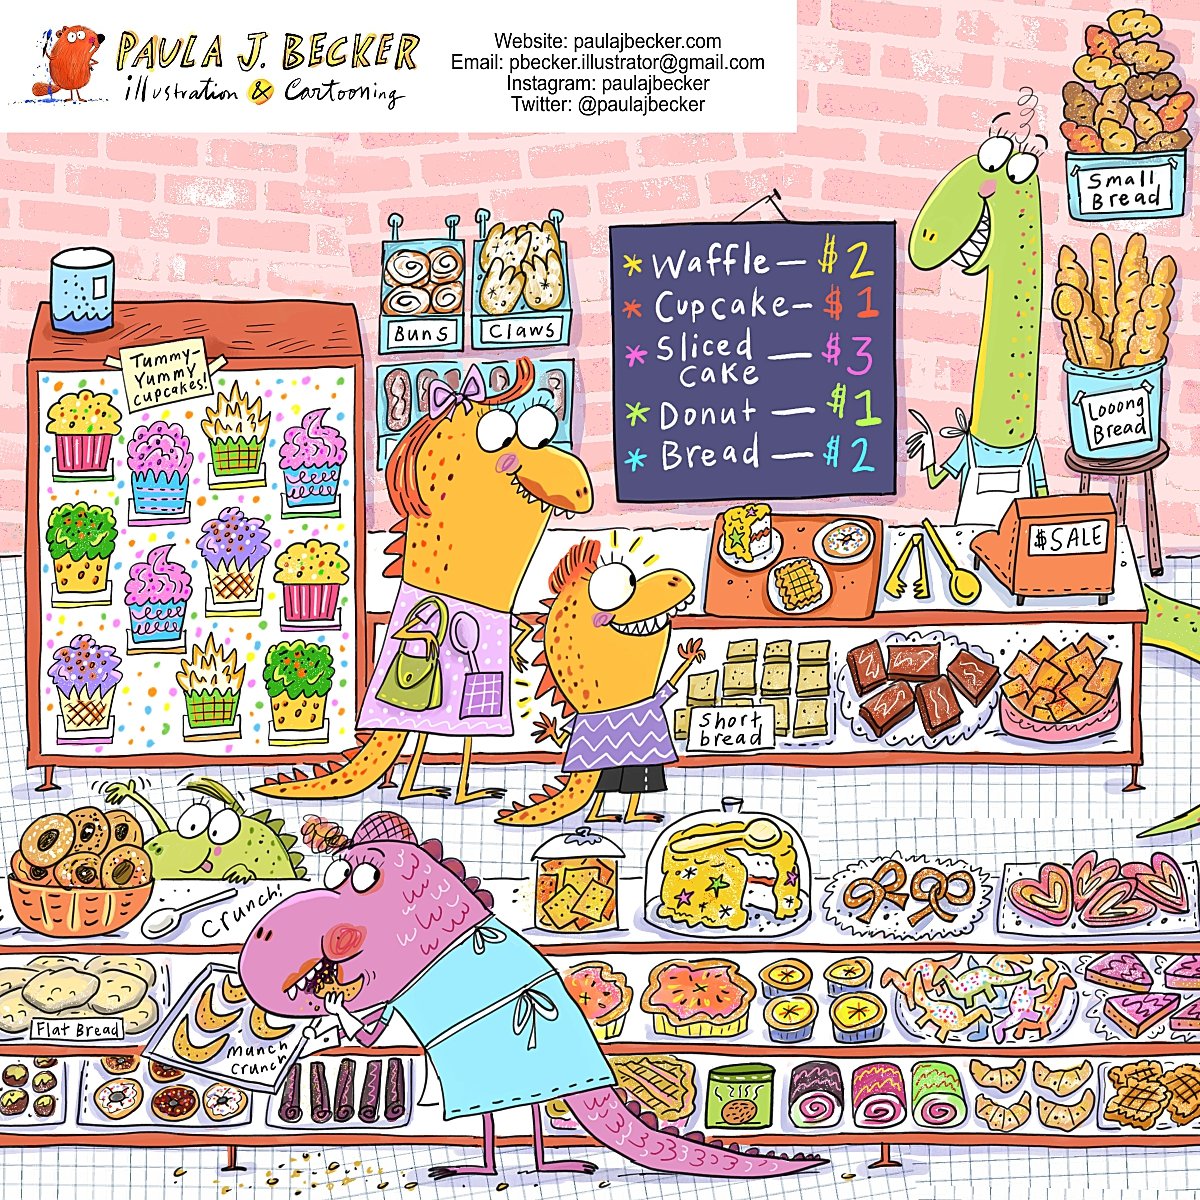 Hi #kidlitpostcard ! I'm Paula, a #illustrator #kidlitillustrator #kidlitartist #childrensbookillustrator #cartoonist & #illustrate for #childrensmagazines #childrensbooks #puzzles #greetingcards, etc. This is part of a recent puzzle spread I had the pleasure to illustrate!